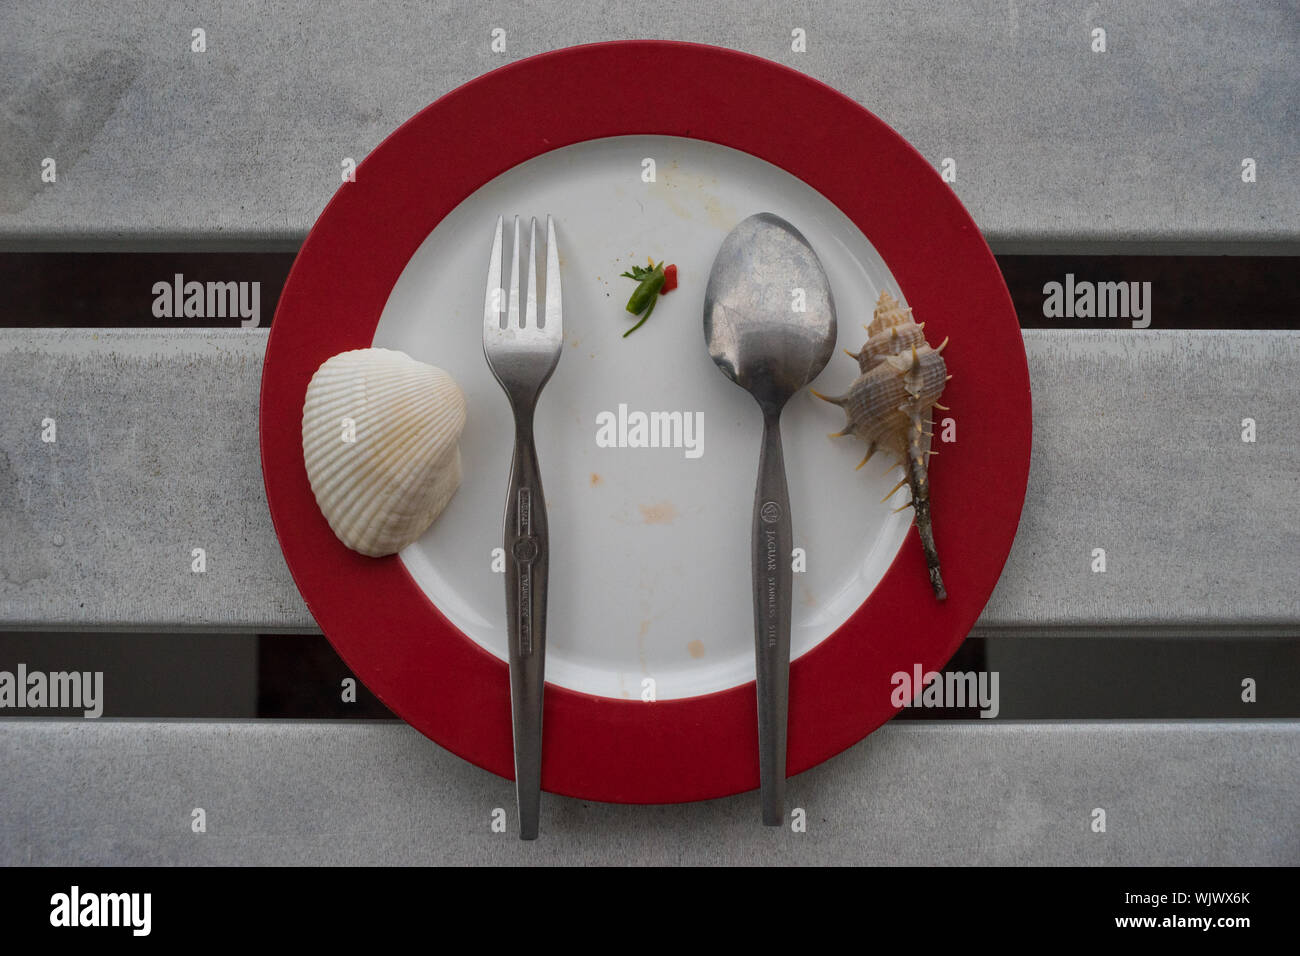 Directly Above Shot Of Seashell With Silverware On Plate At Table Stock Photo